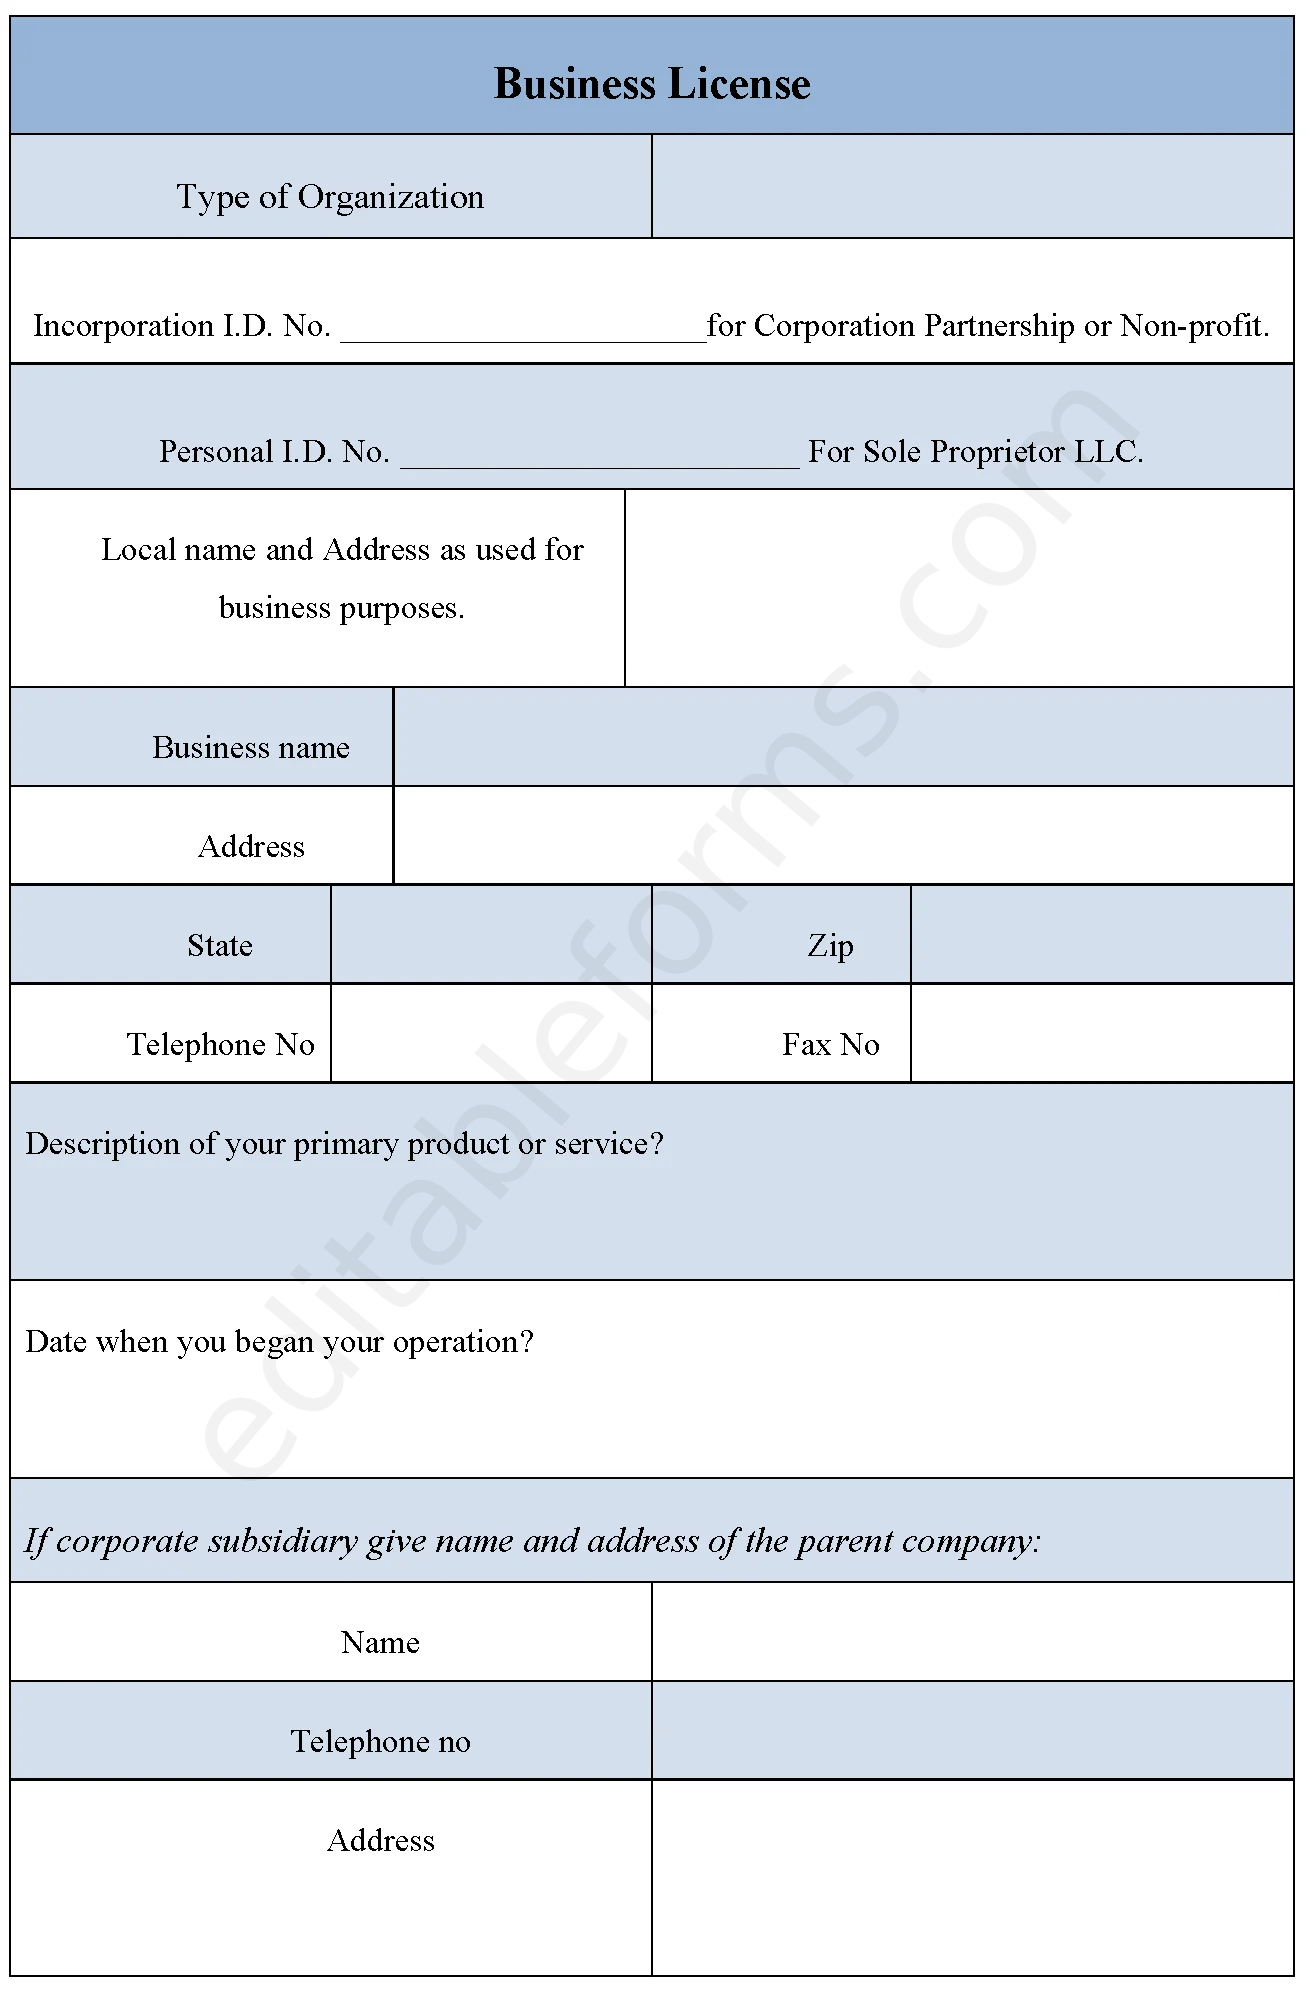 Sample Business License Fillable PDF Template